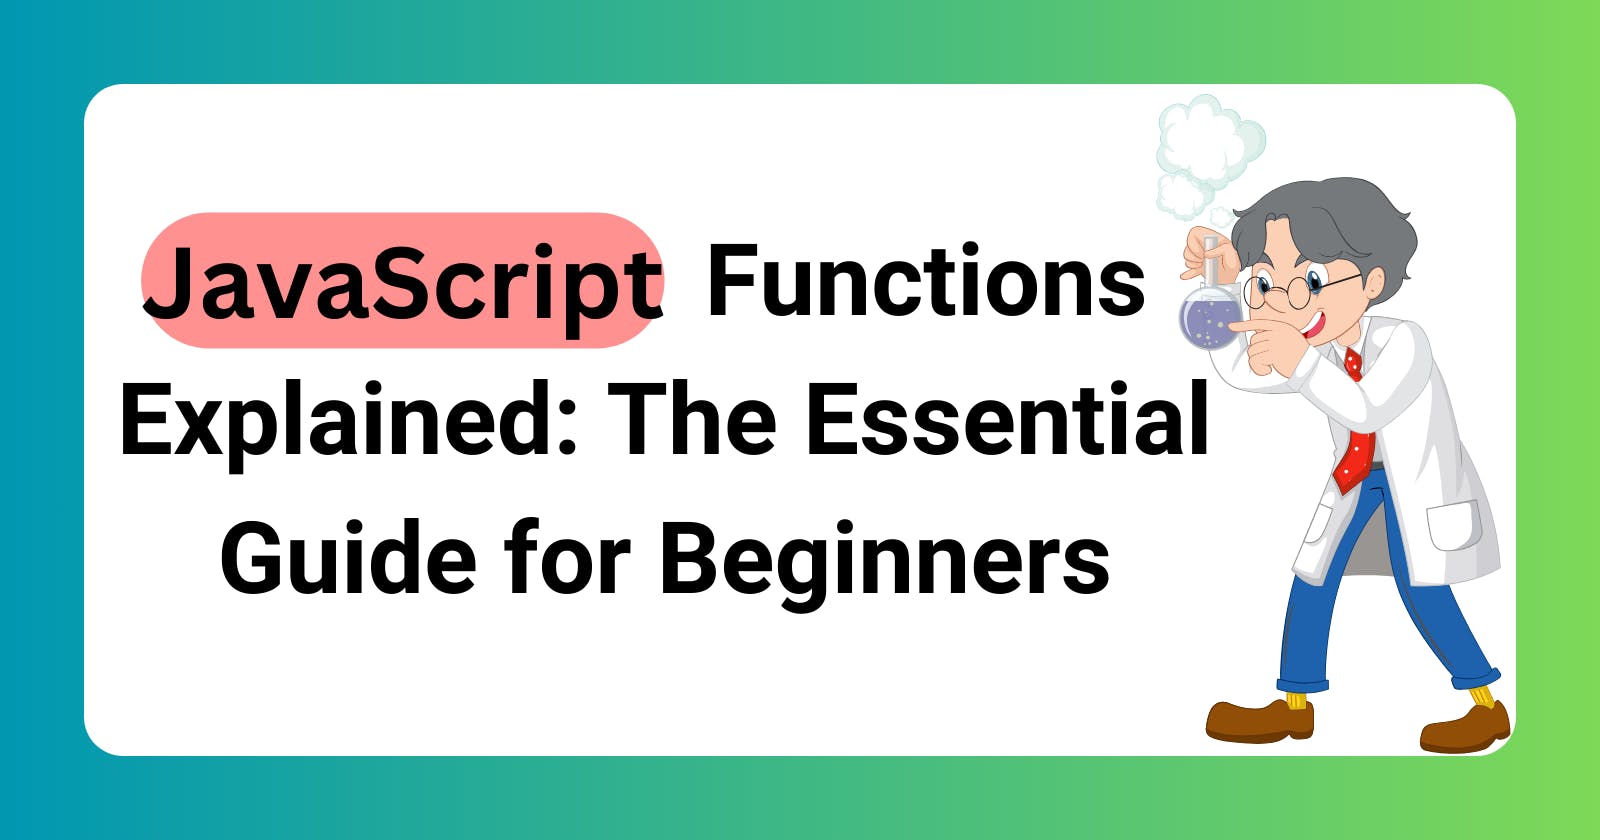 JavaScript Functions Explained: The Essential Guide for Beginners